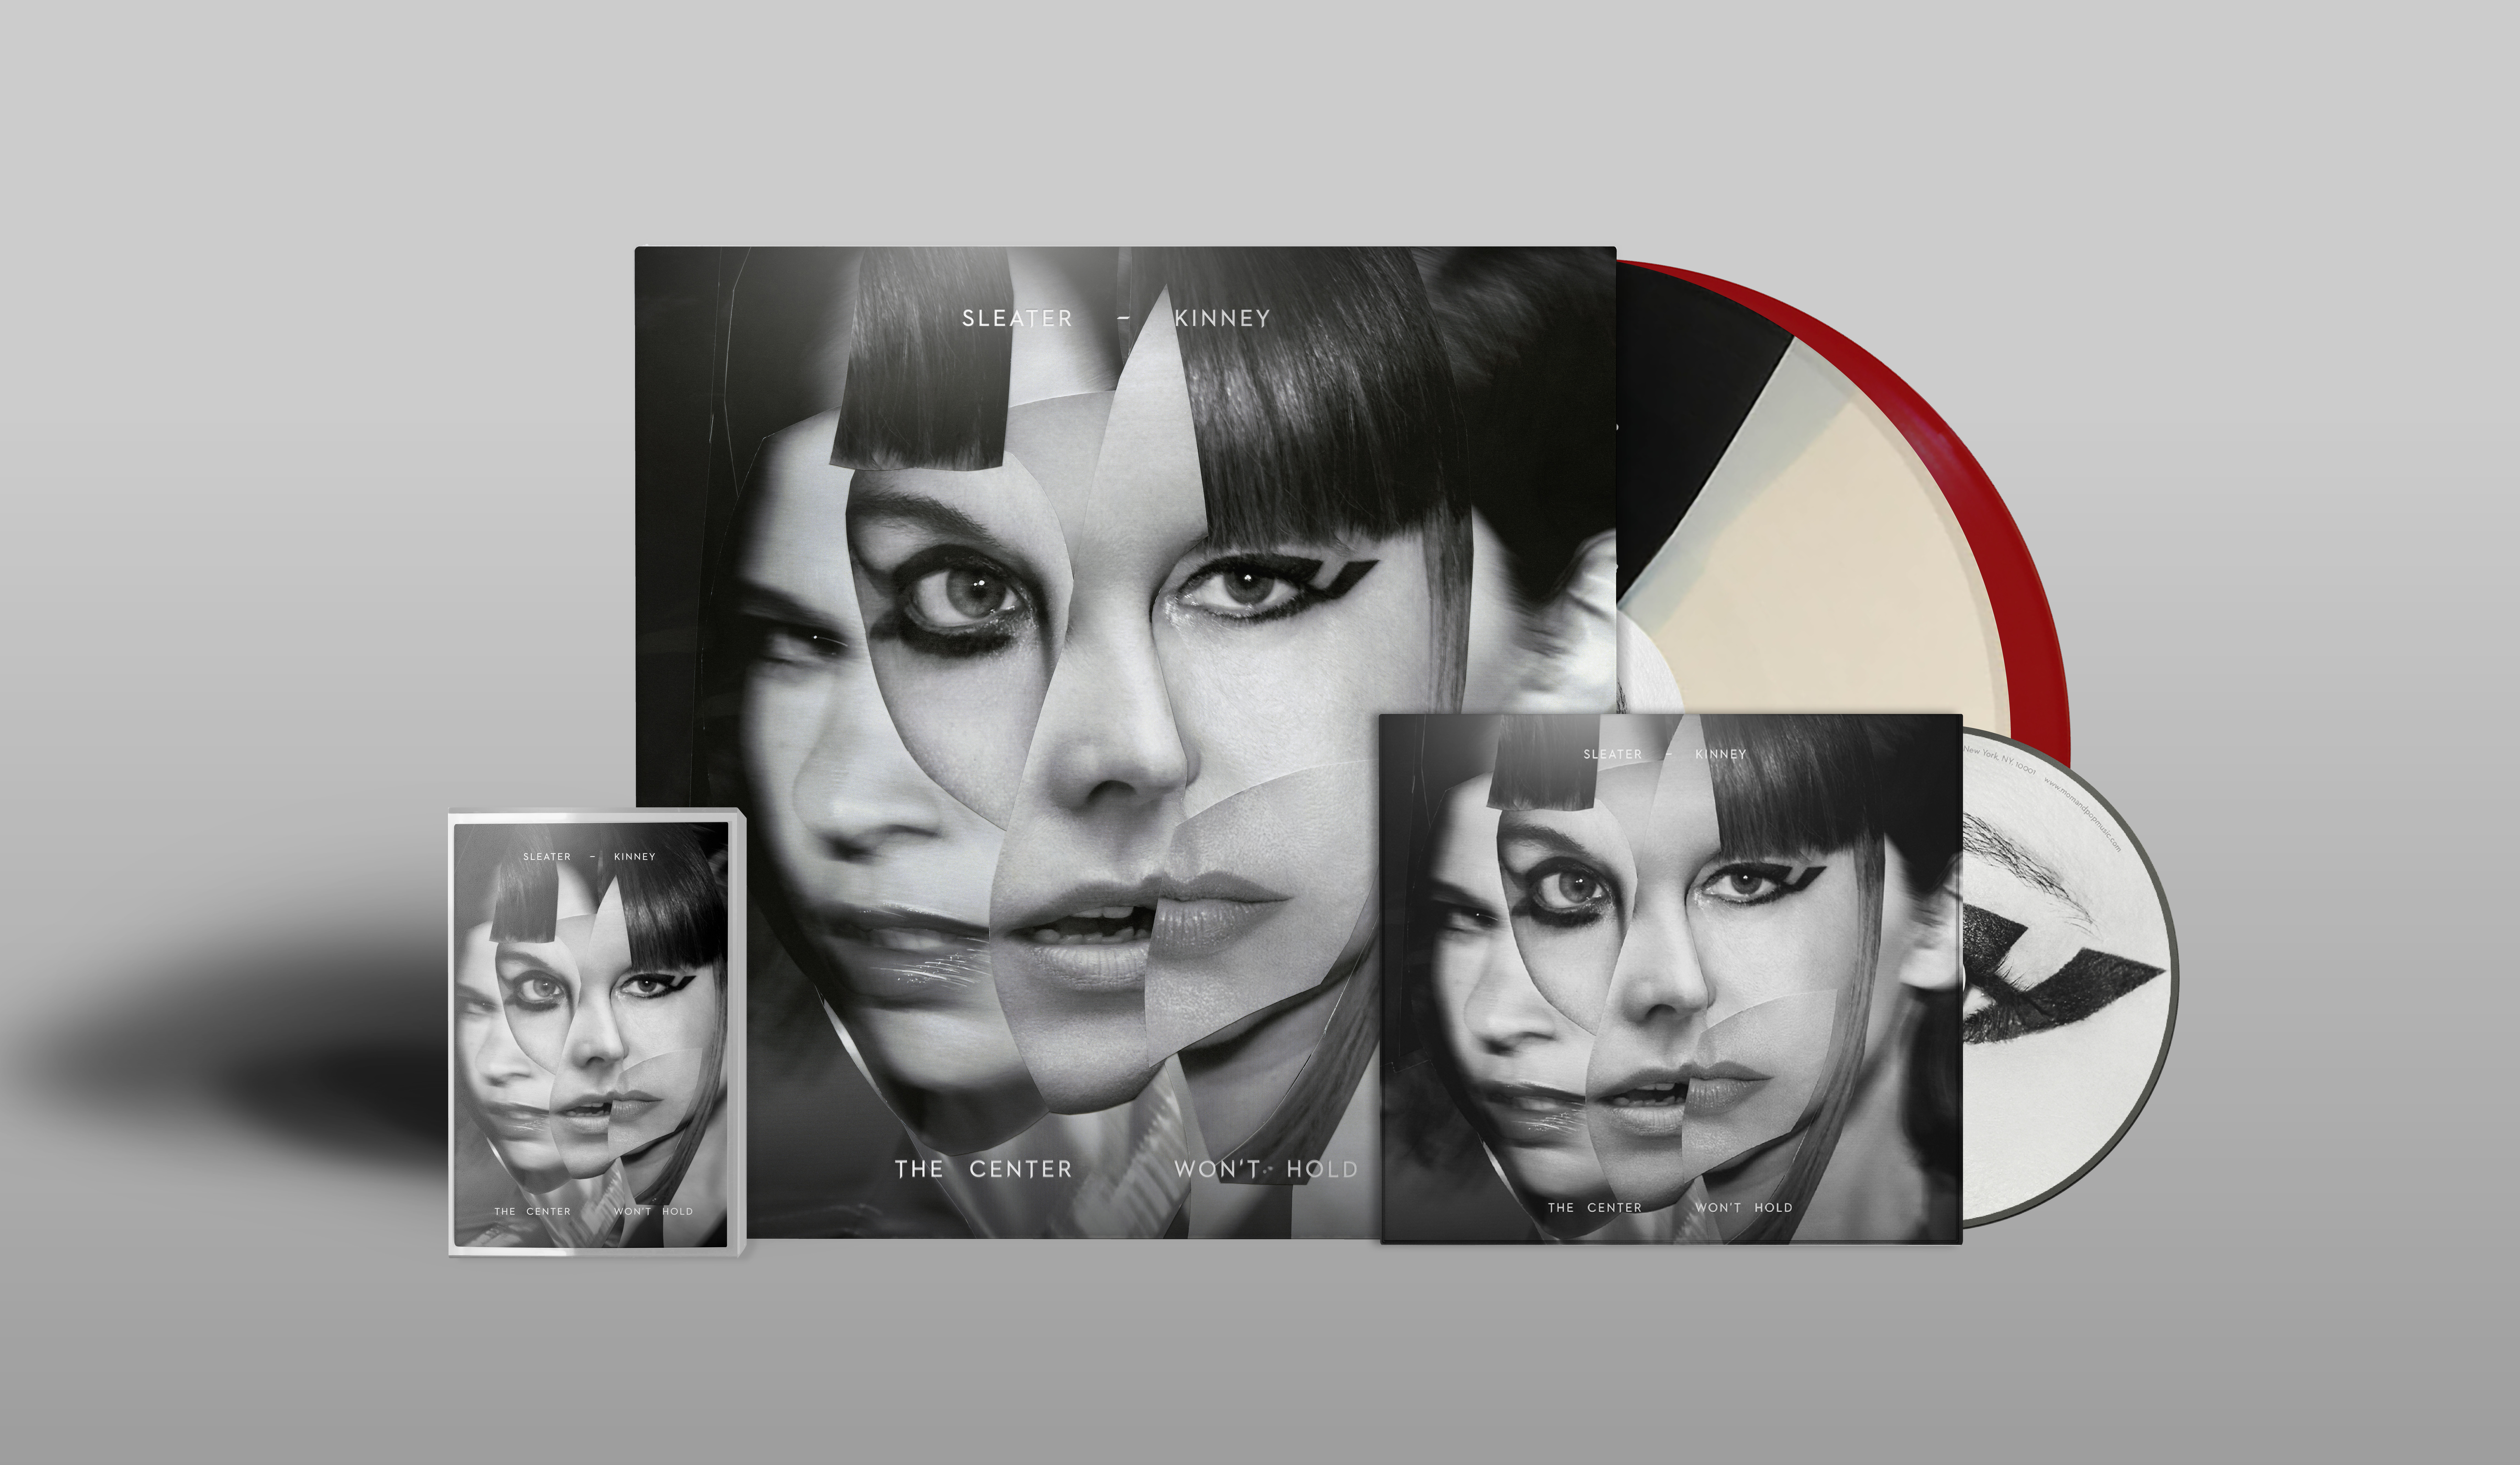 POSTER by SLEATER KINNEY center wont hold Promo For the bands tour album cd...